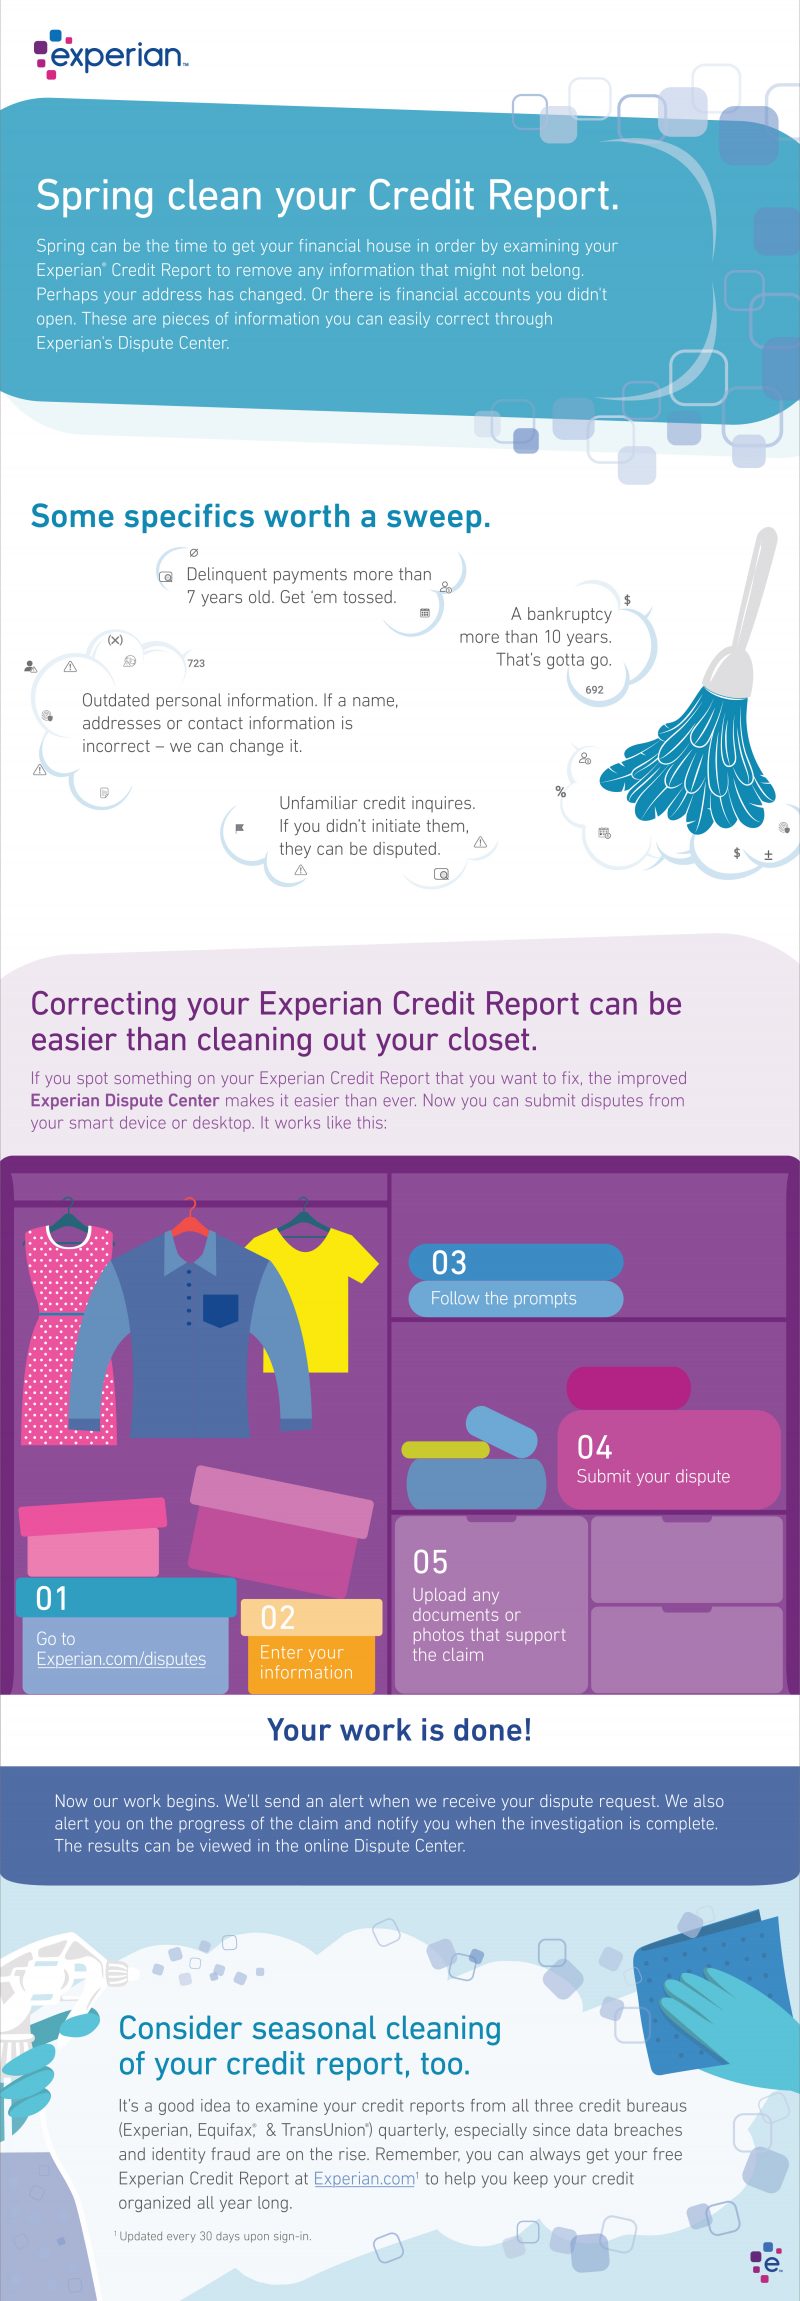 Awesome Ways to Spring Clean Your Credit Report